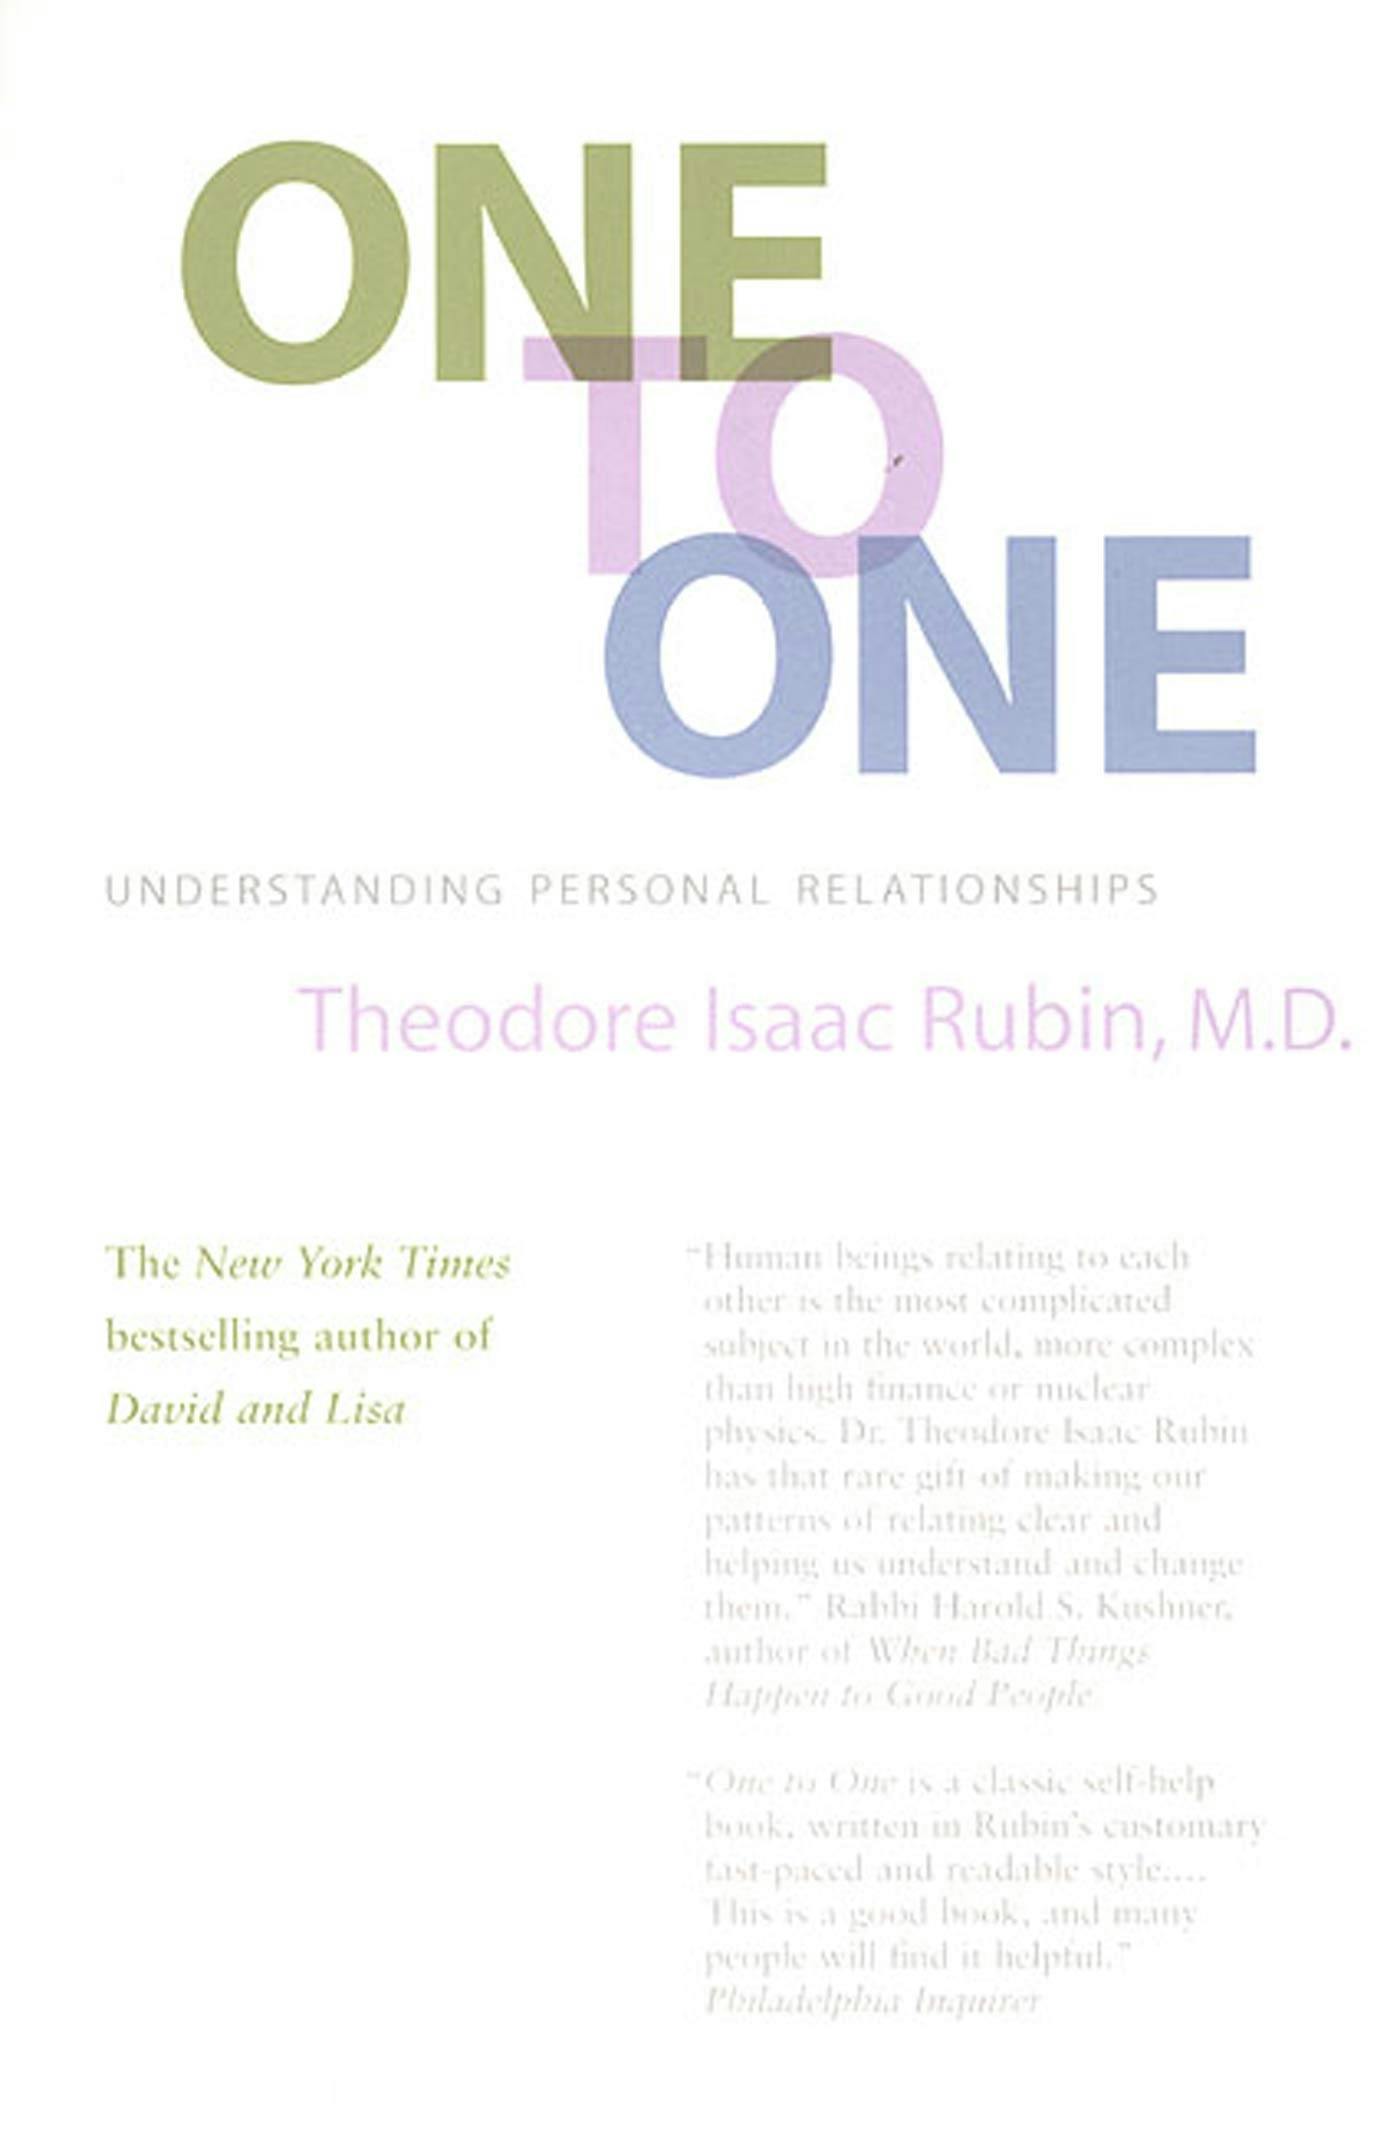 Cover for the book titled as: One To One